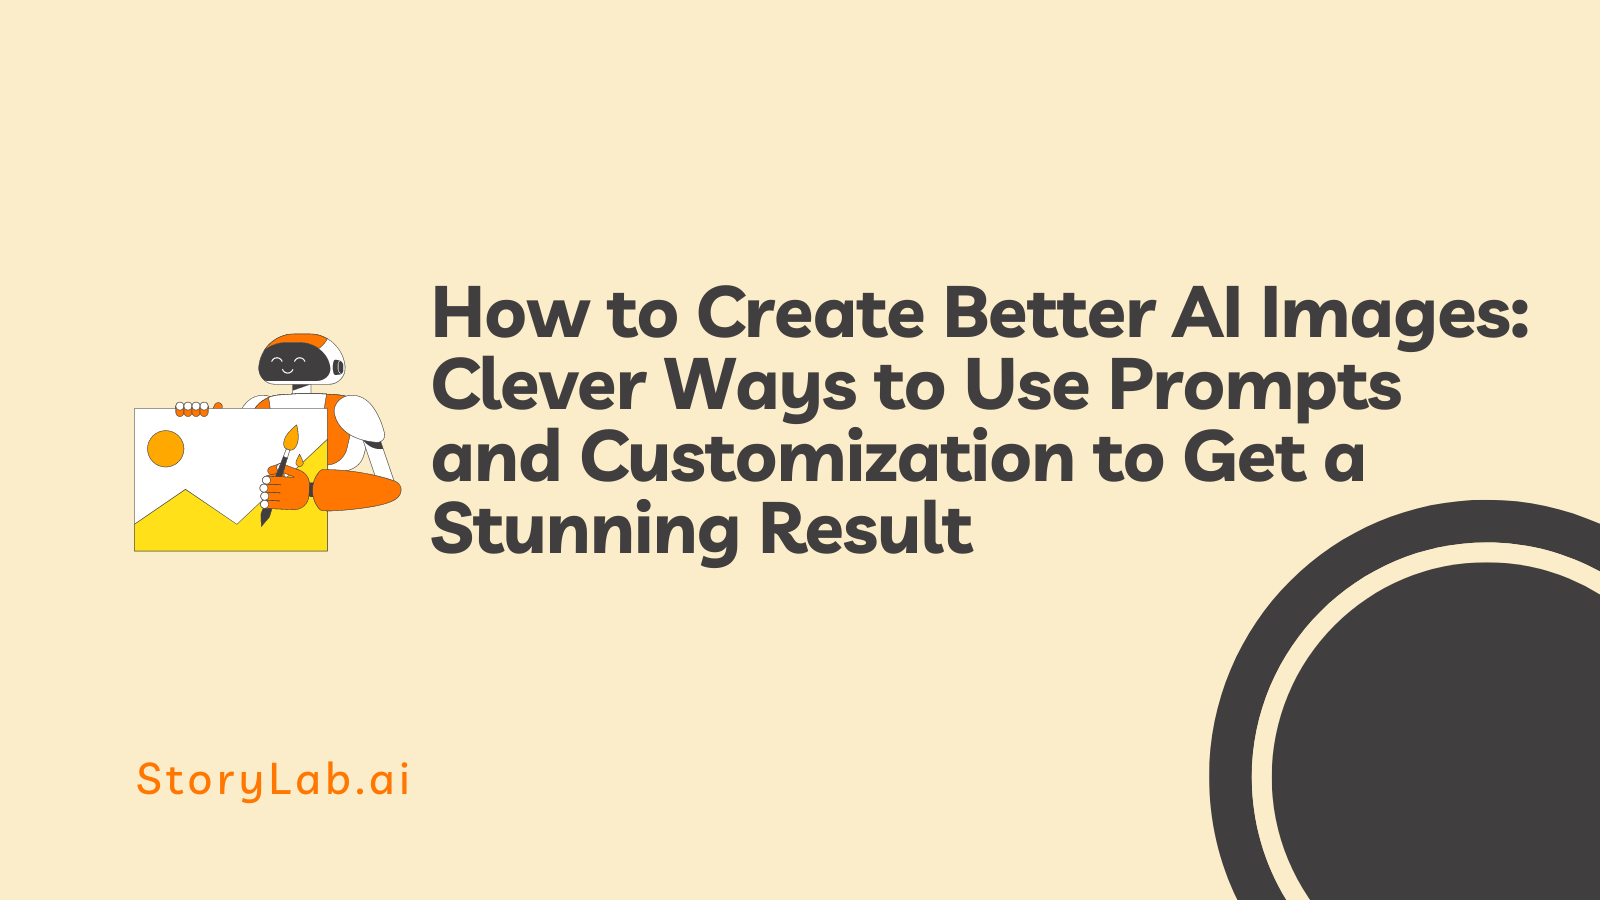 How to Create Better AI Images Clever Ways to Use Prompts and Customization to Get a Stunning Result